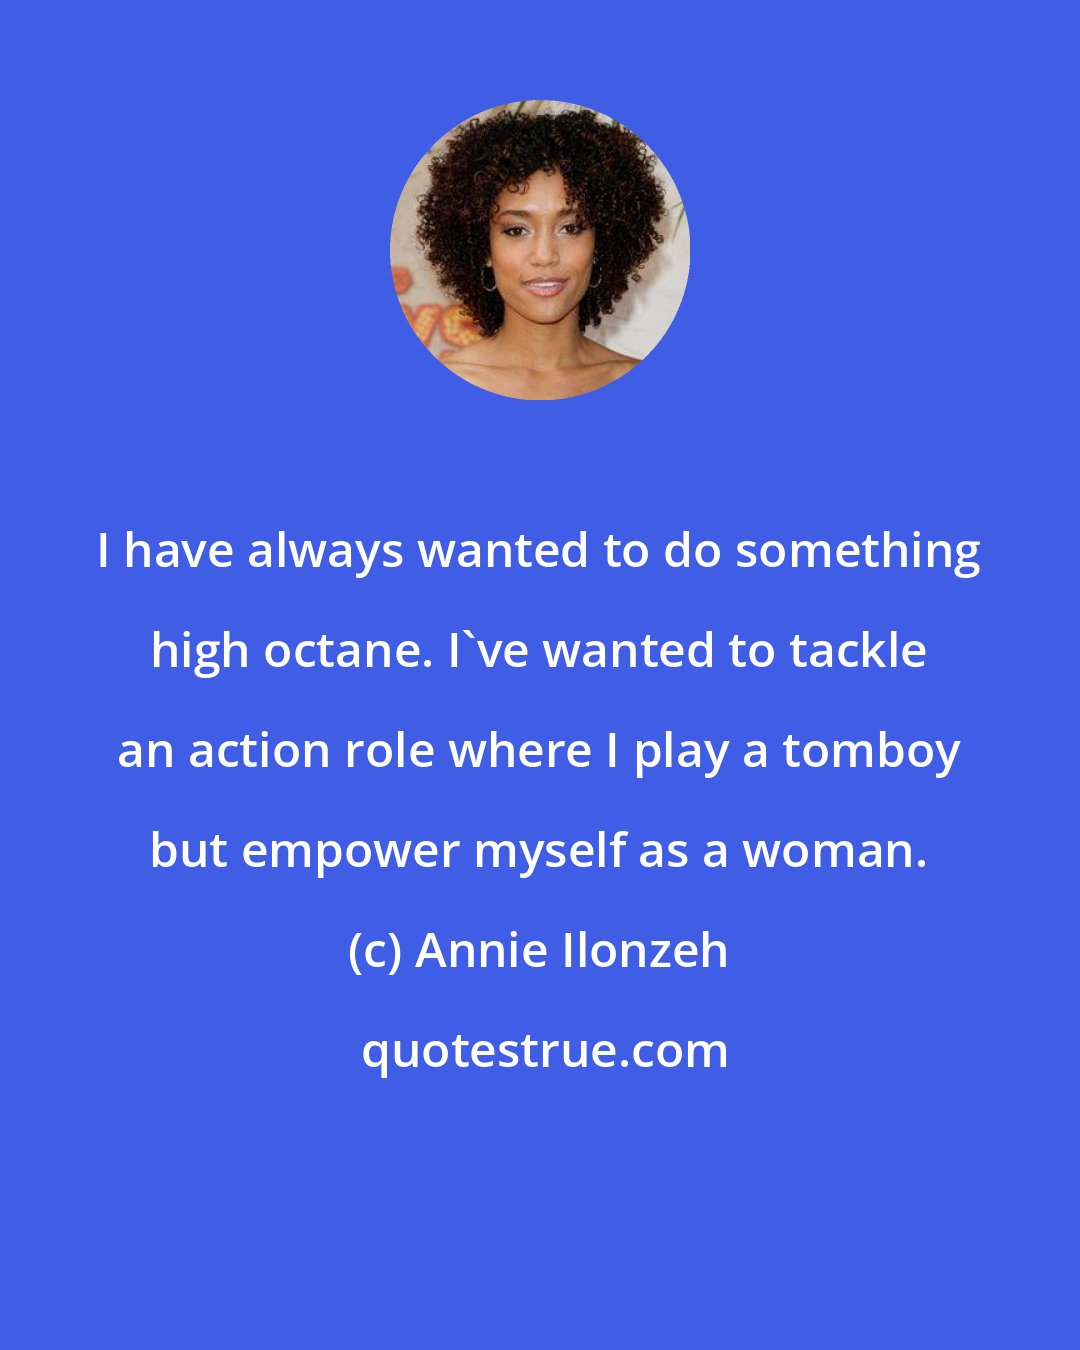 Annie Ilonzeh: I have always wanted to do something high octane. I've wanted to tackle an action role where I play a tomboy but empower myself as a woman.